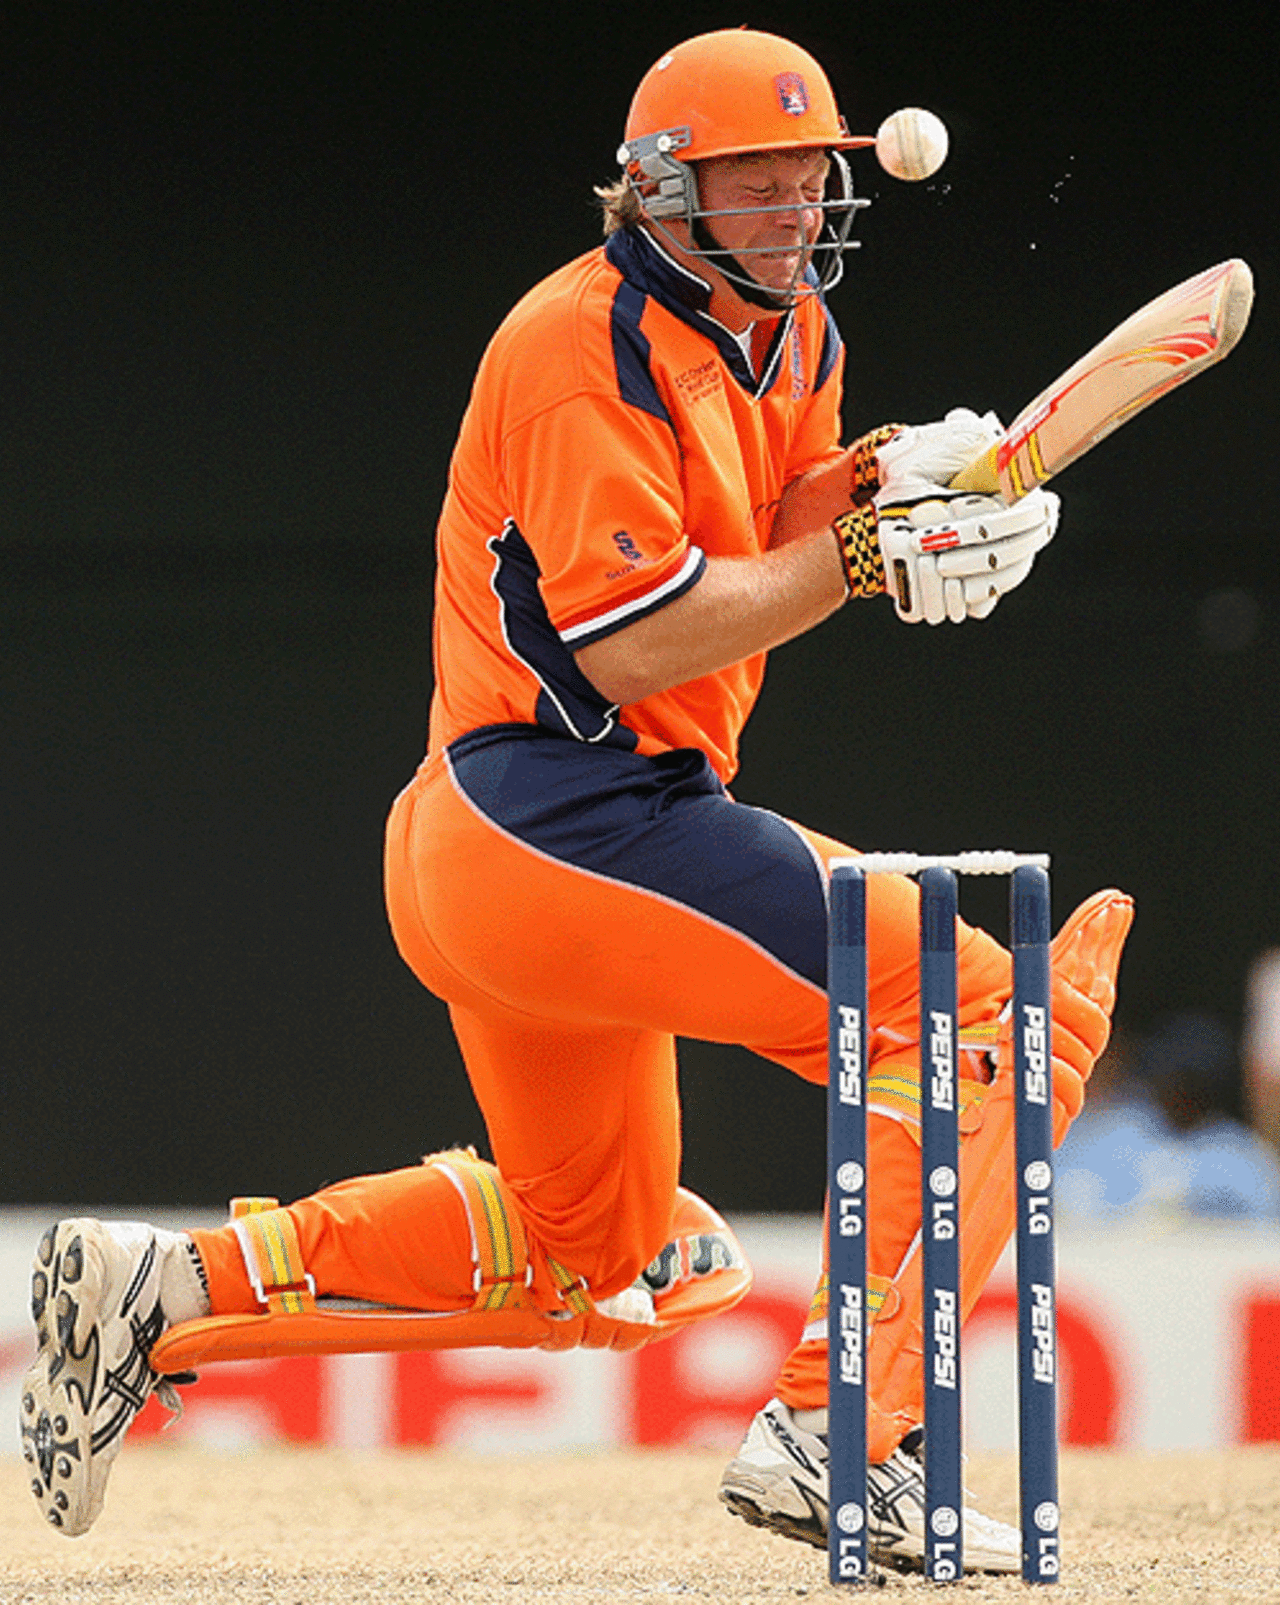 Tim de Leede tries to avoid a bouncer, Australia v Netherlands, Group A, St Kitts, March 18, 2007